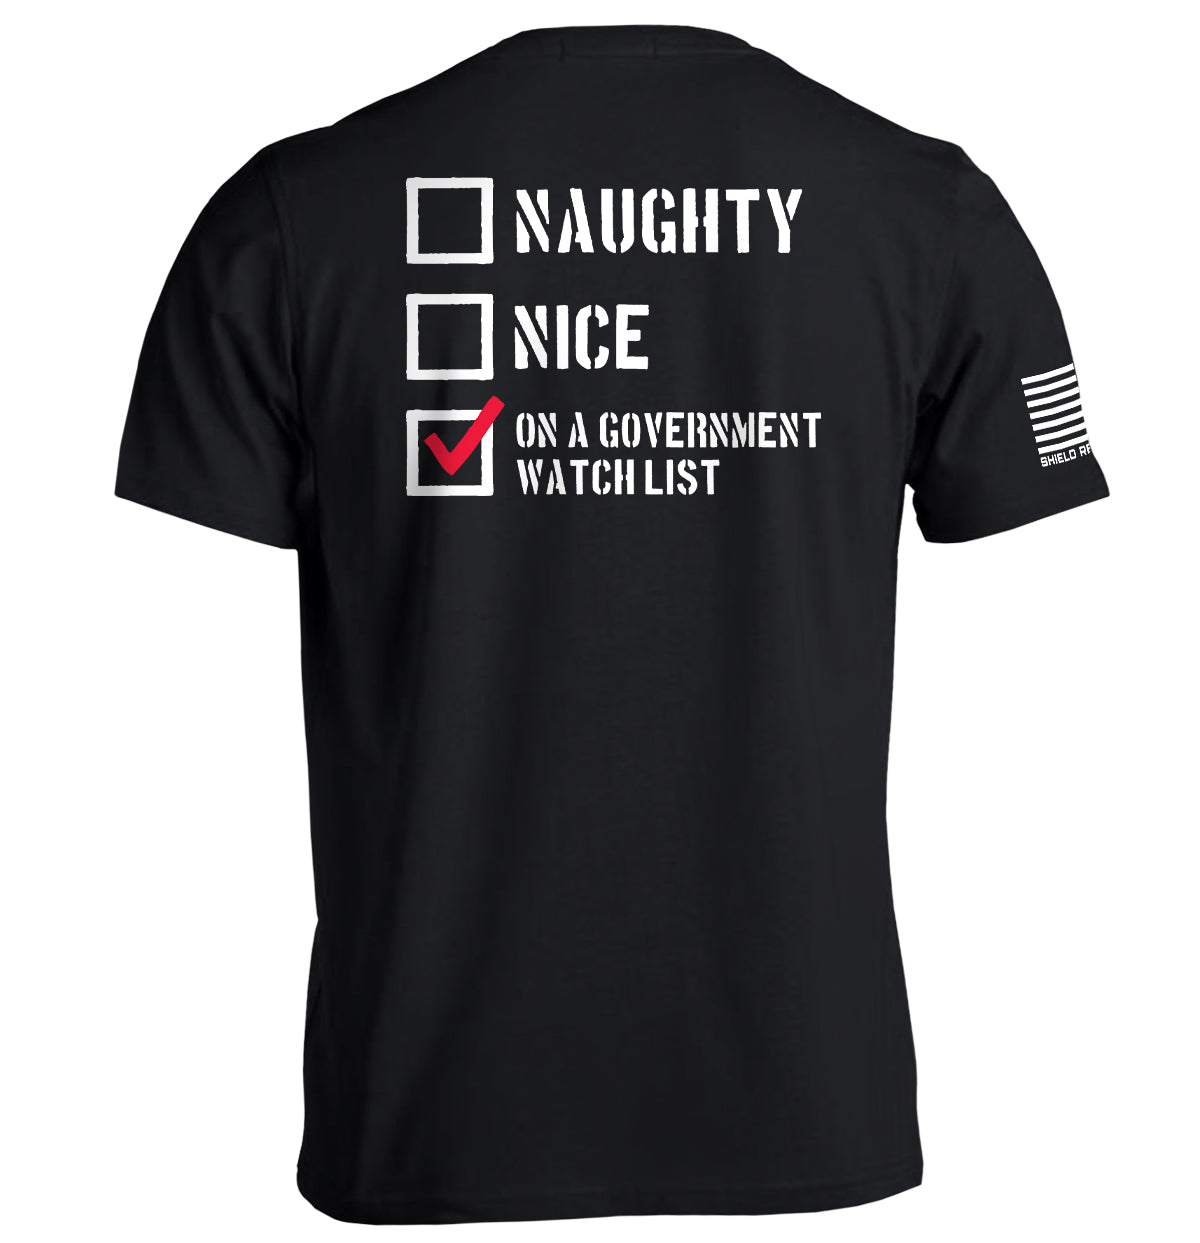 Naughty Nice On a Government Watch List